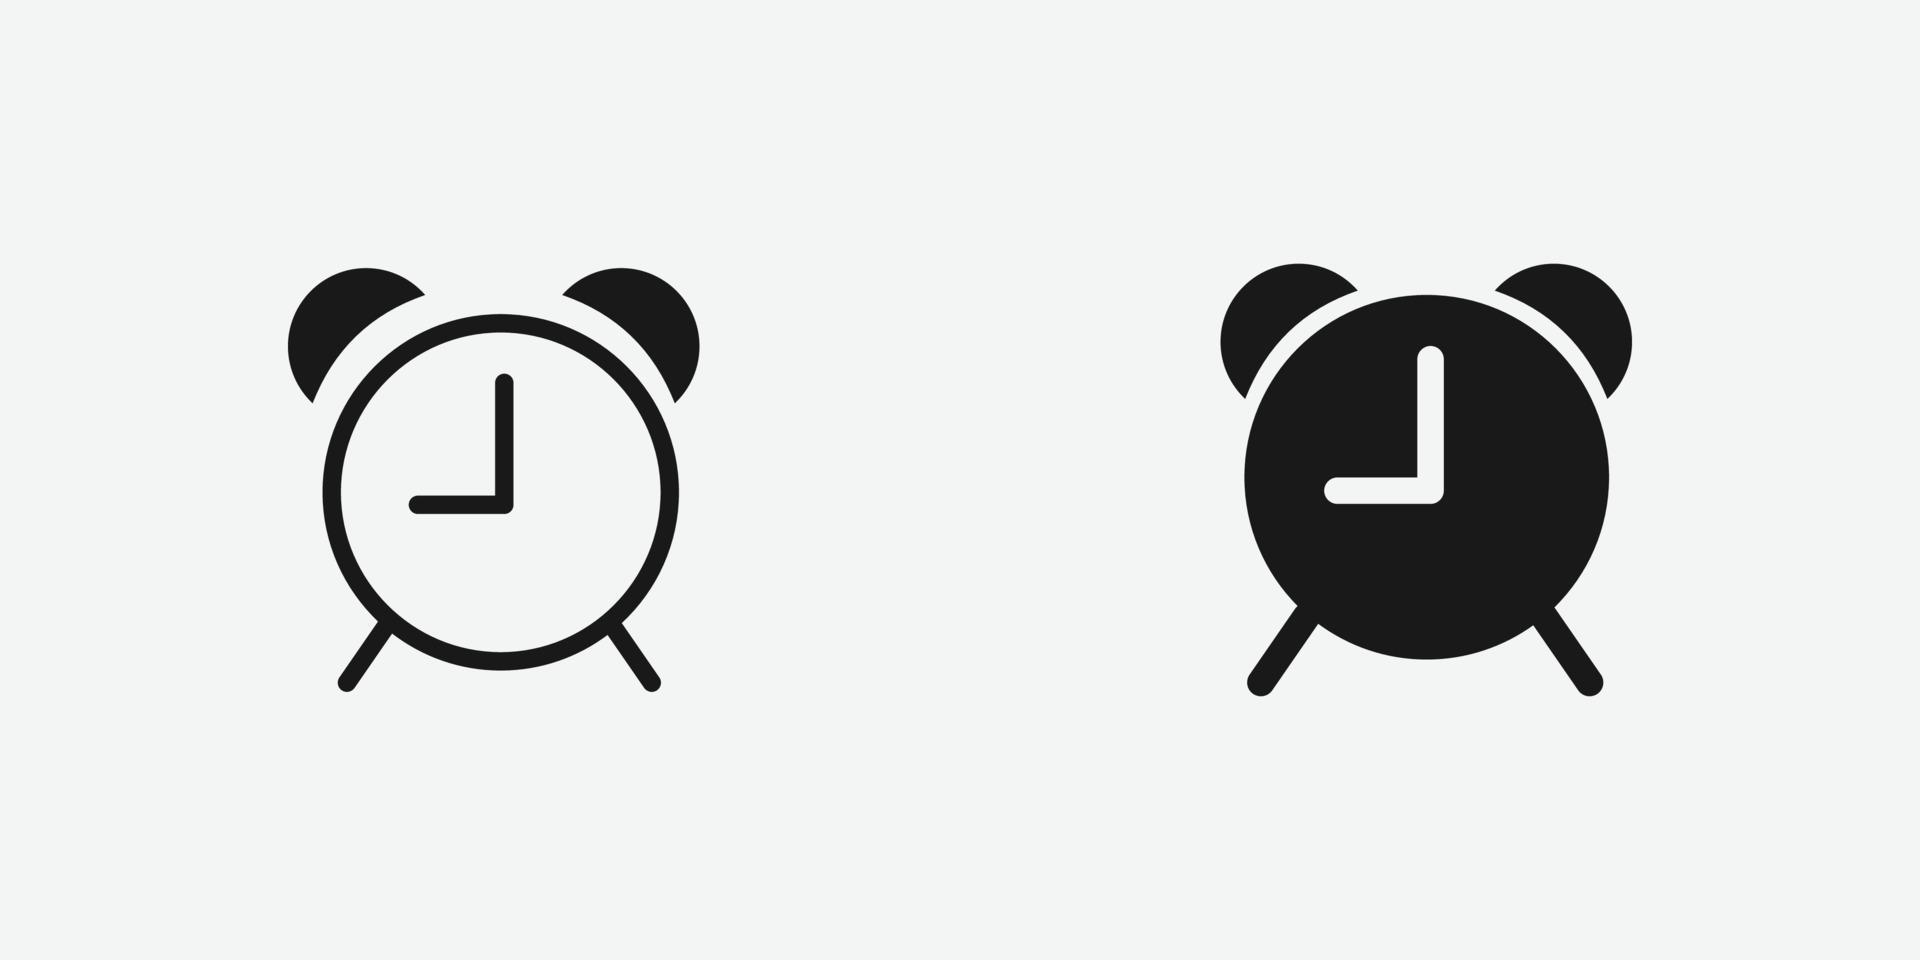 https://static.vecteezy.com/system/resources/previews/002/219/591/non_2x/illustration-of-alarm-clock-icon-free-vector.jpg